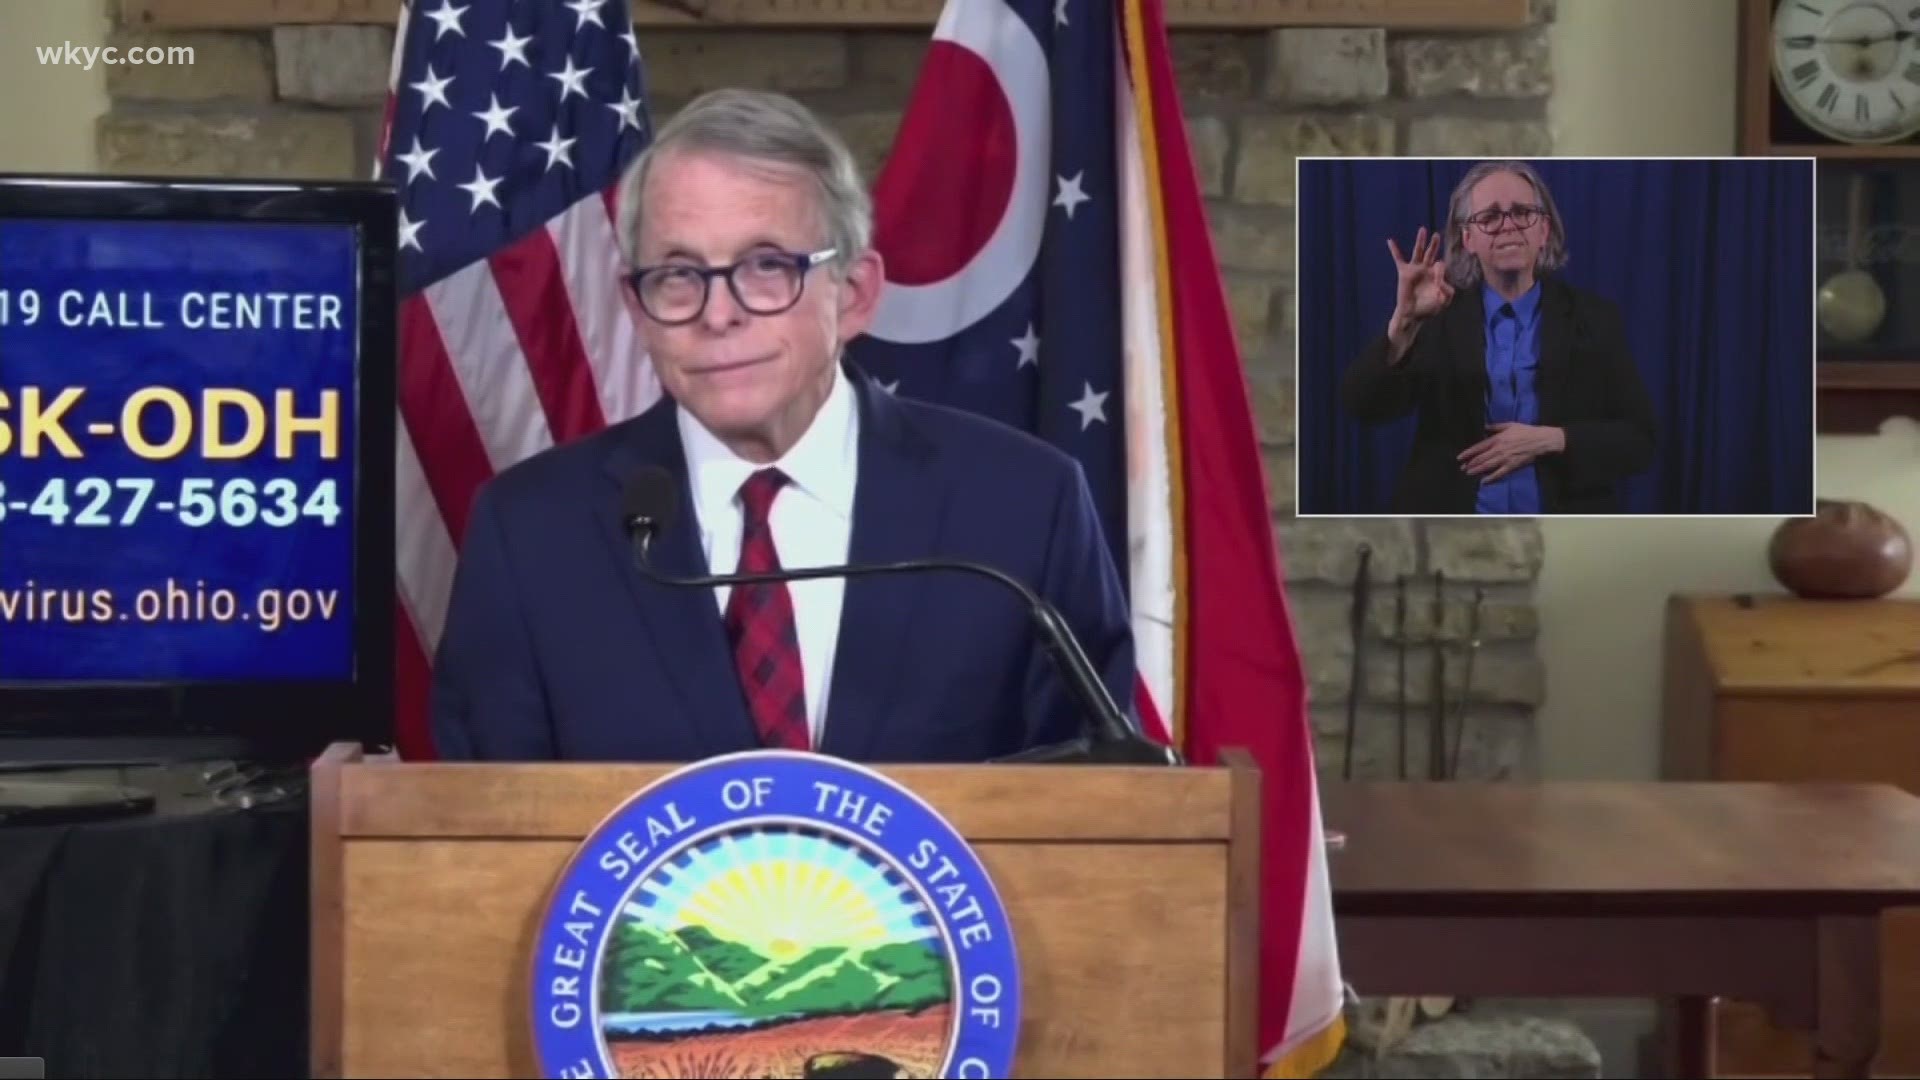 Governor Mike DeWine says Ohio is in the midst of a crisis. A similar message from Doctors who say we must stop the virus - right now. Laura Caso reports.